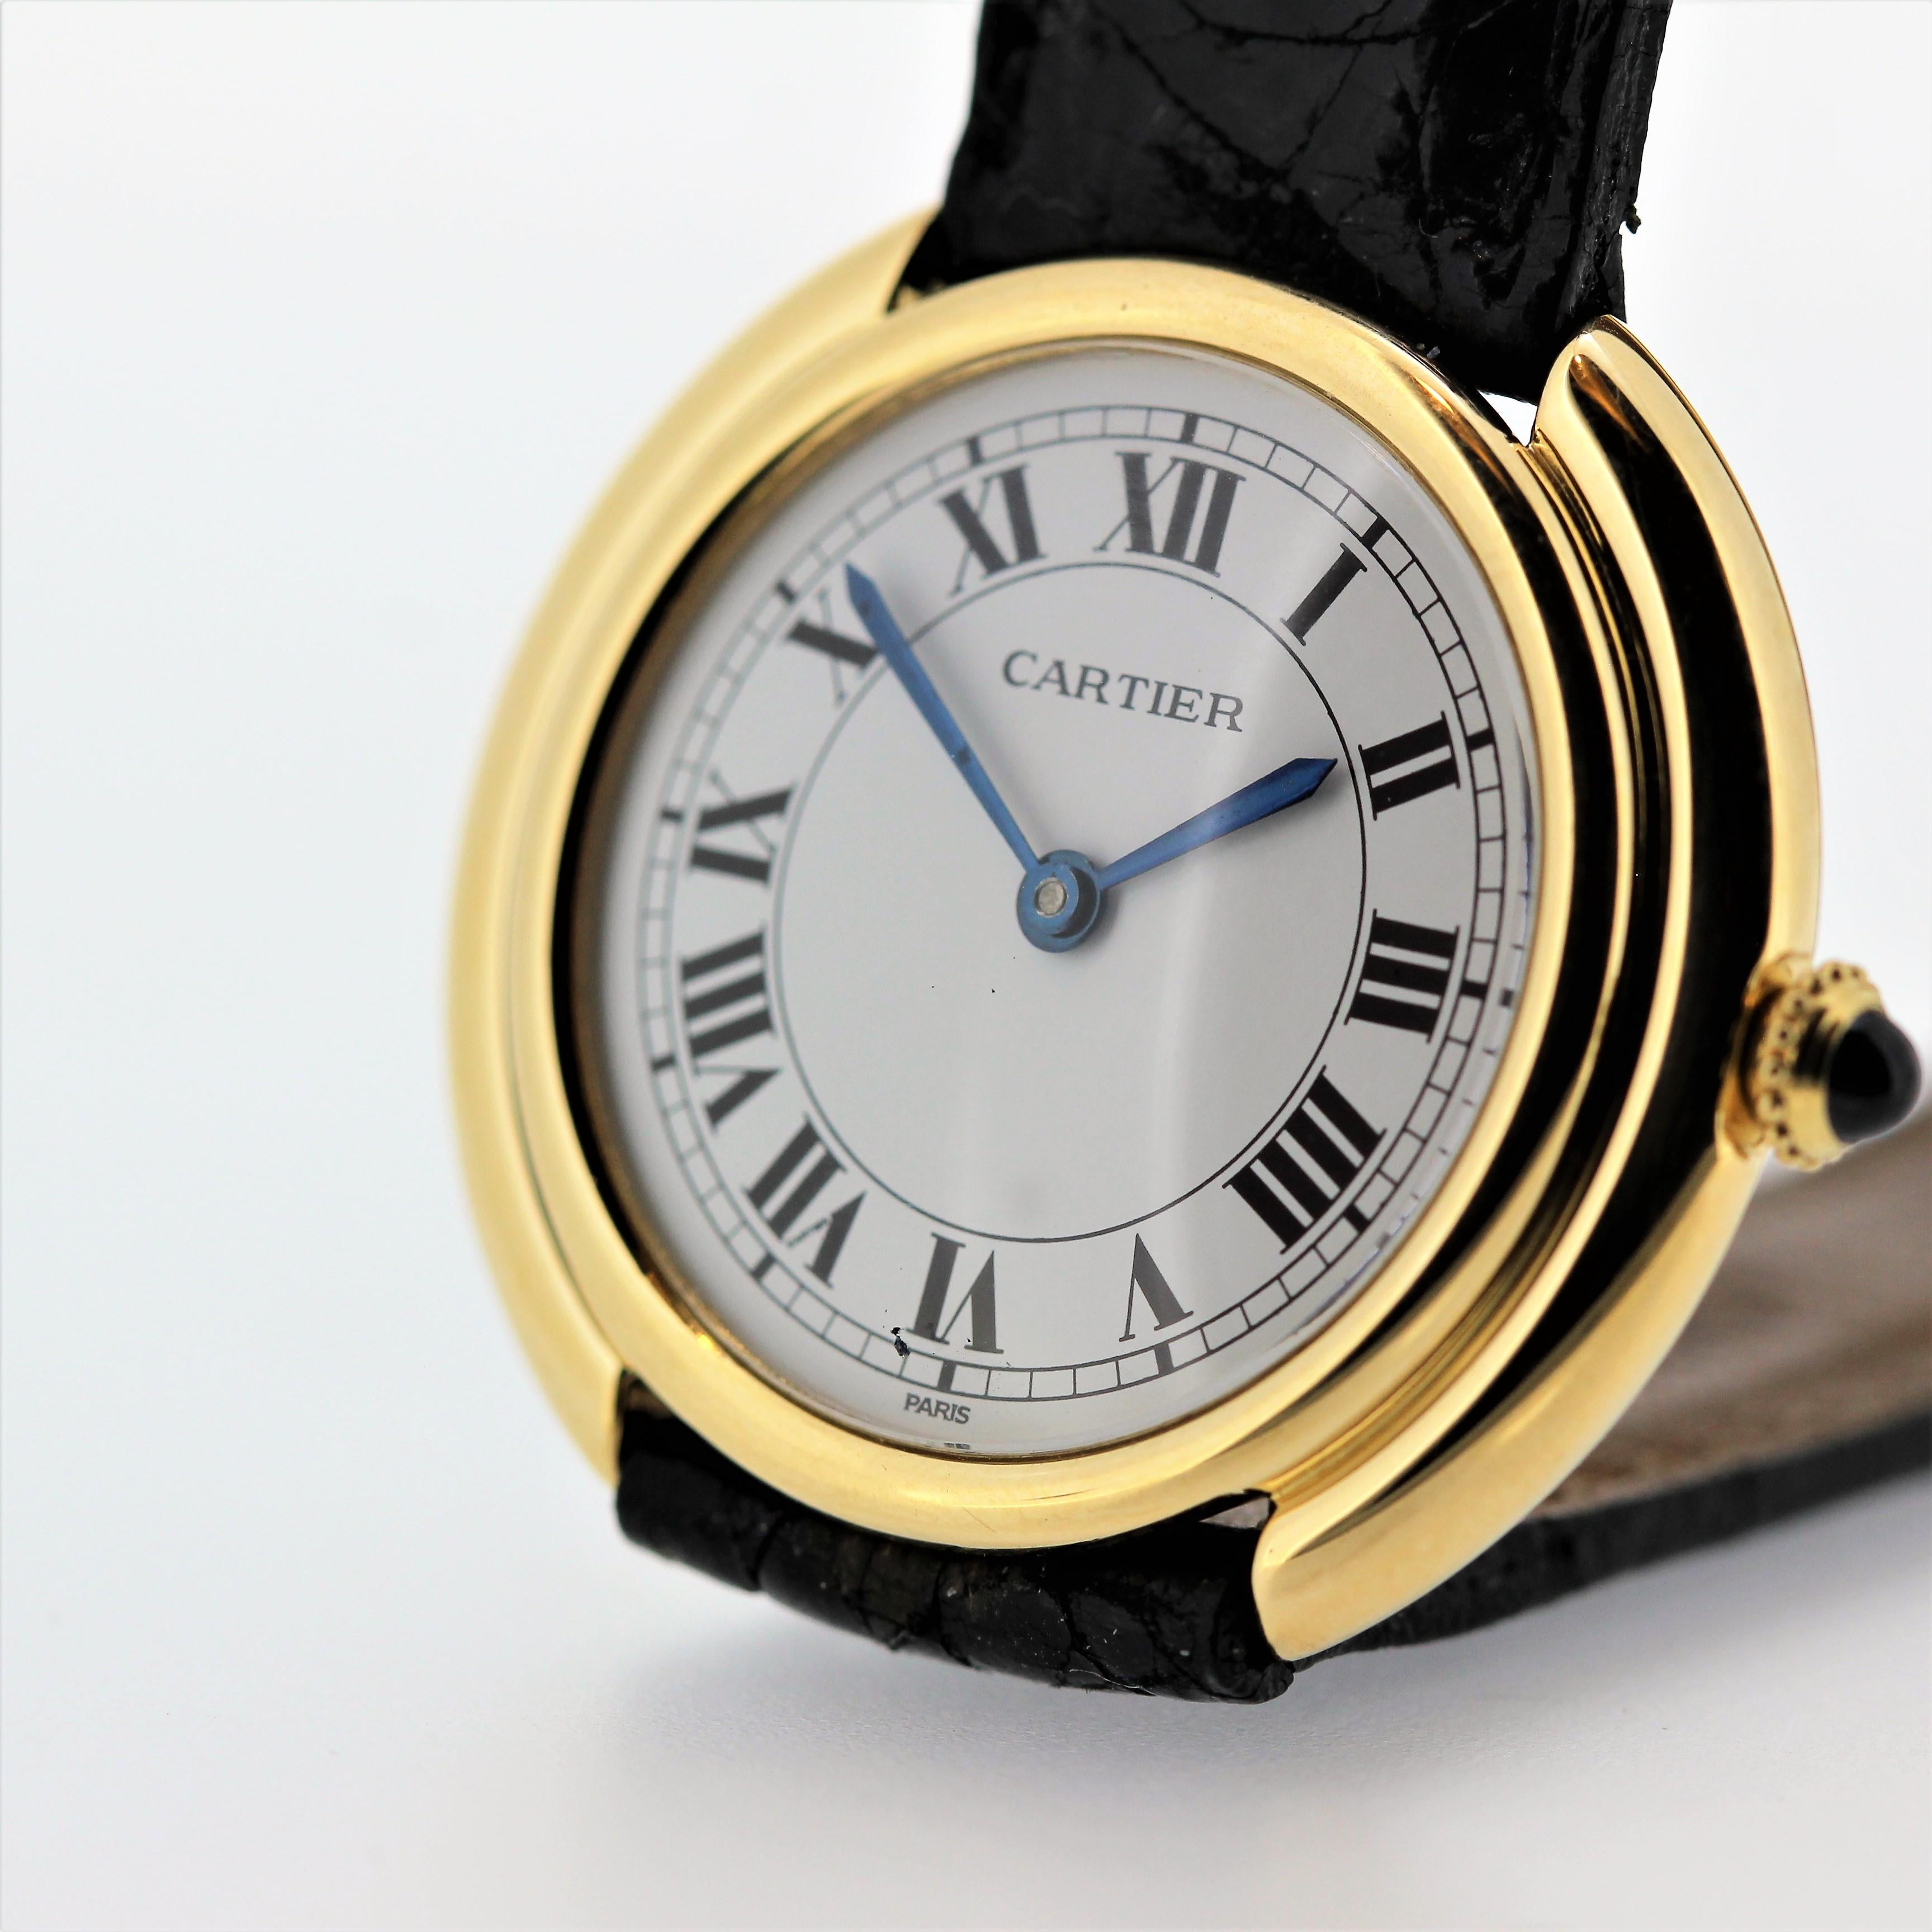 Introduction:
We Have 2 of this Vintage Cartier Watch.  
This Vintage Cartier Paris Vendome watch is the small size, circa 1975-1980.  It is 18K yellow gold and measures 26mm in diameter with mechanical manual wind 17 jewel movement.  It has a